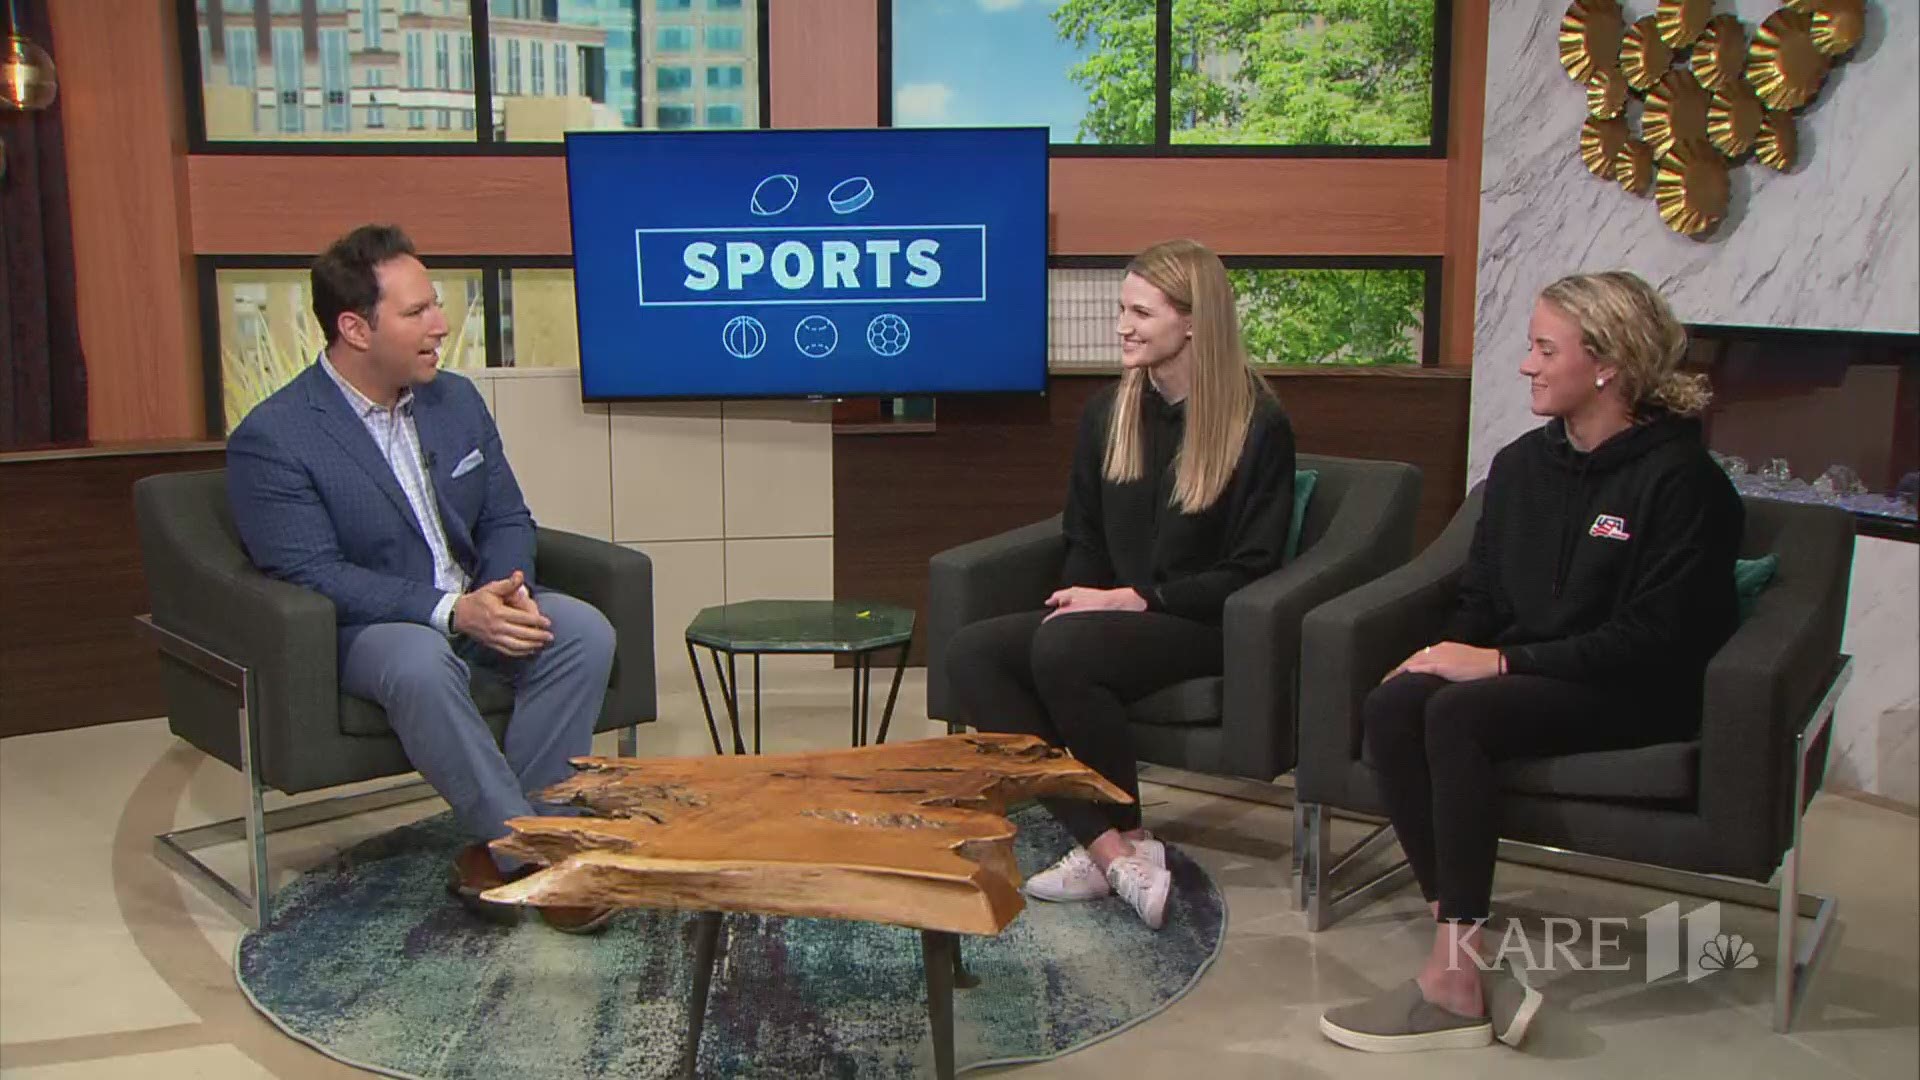 Dave Schwartz spoke about the comeback and the win with Minnesotan Team USA members Lee Stecklein and Sydney Brodt. https://kare11.tv/2Gur4Tv